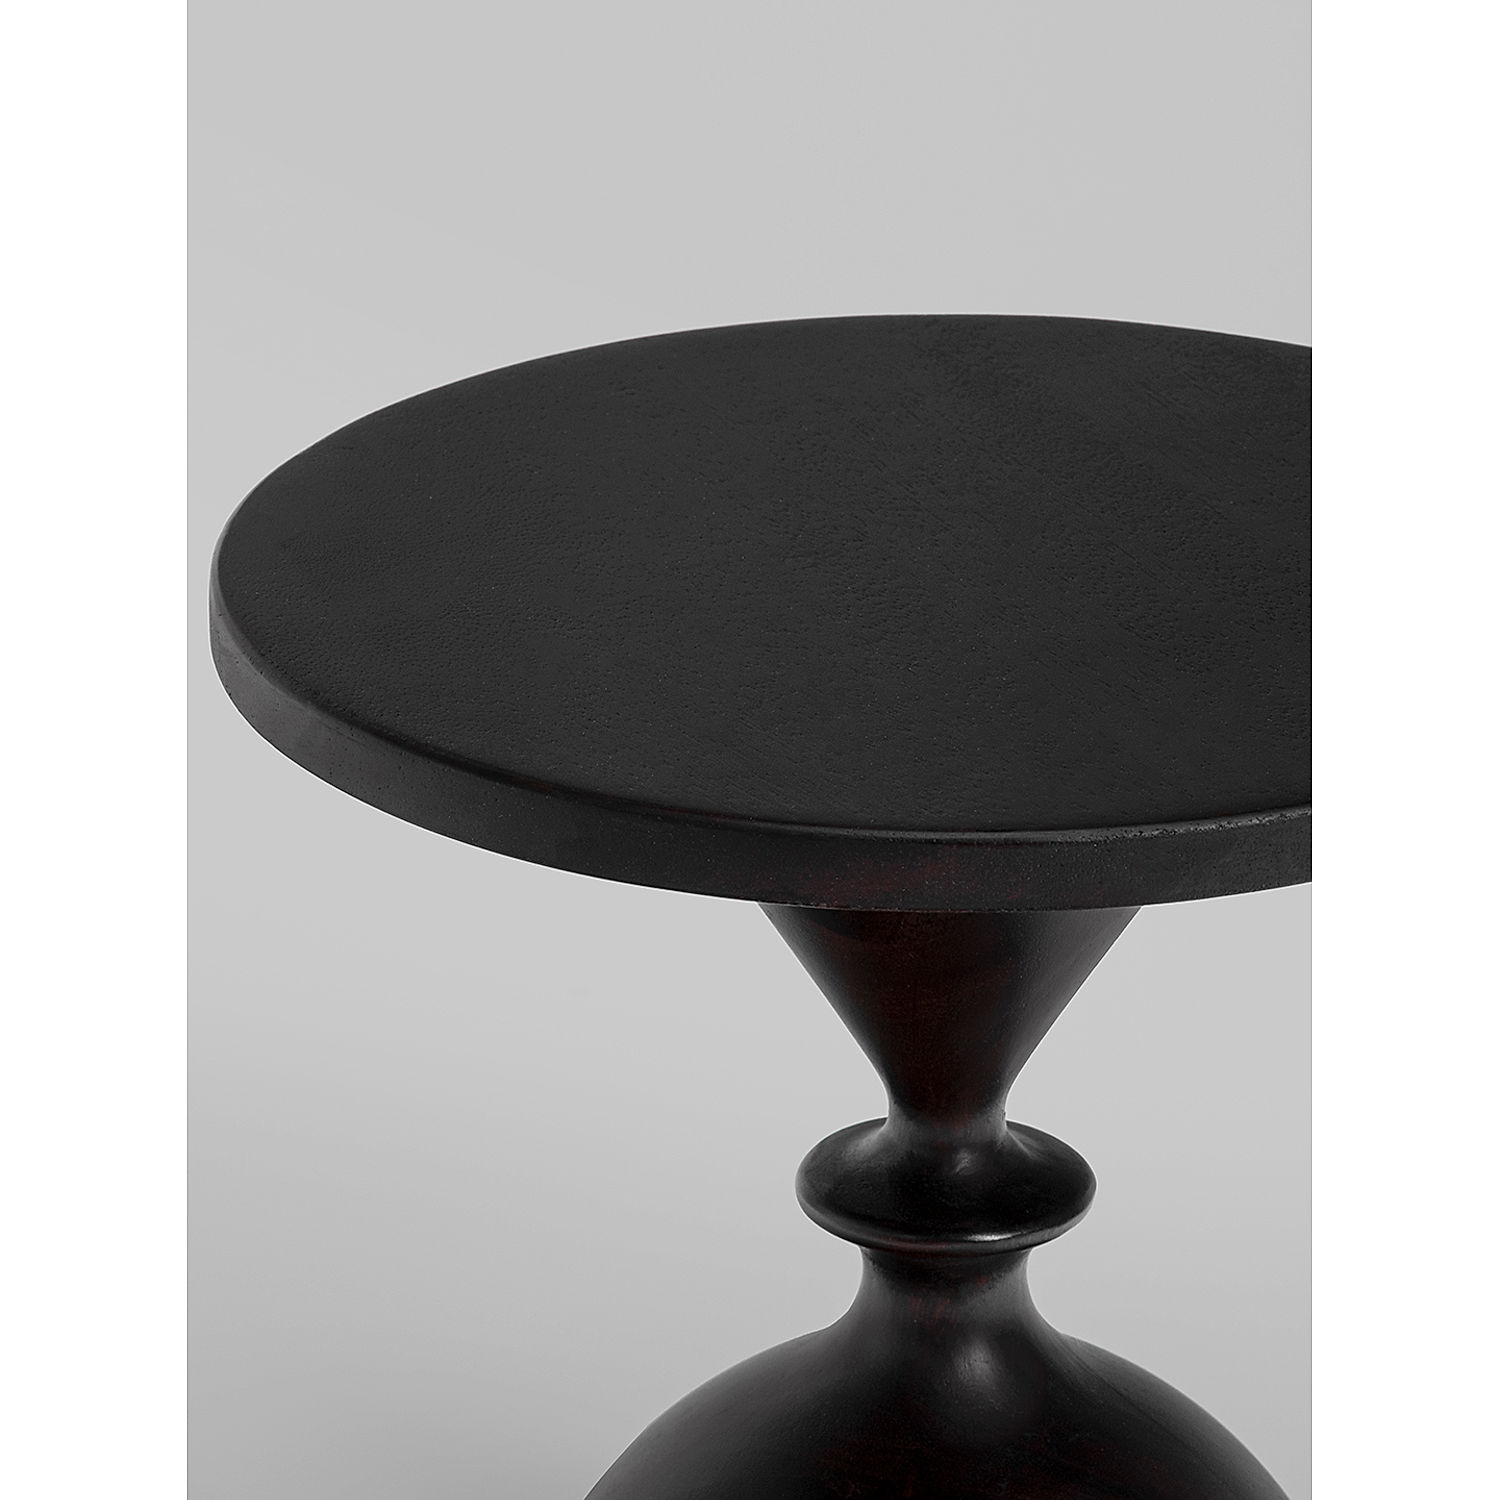 Buy housethis Panna Mian Marble & Wooden 1 Cake Stand - White Online - Best  Price housethis Panna Mian Marble & Wooden 1 Cake Stand - White - Justdial  Shop Online.